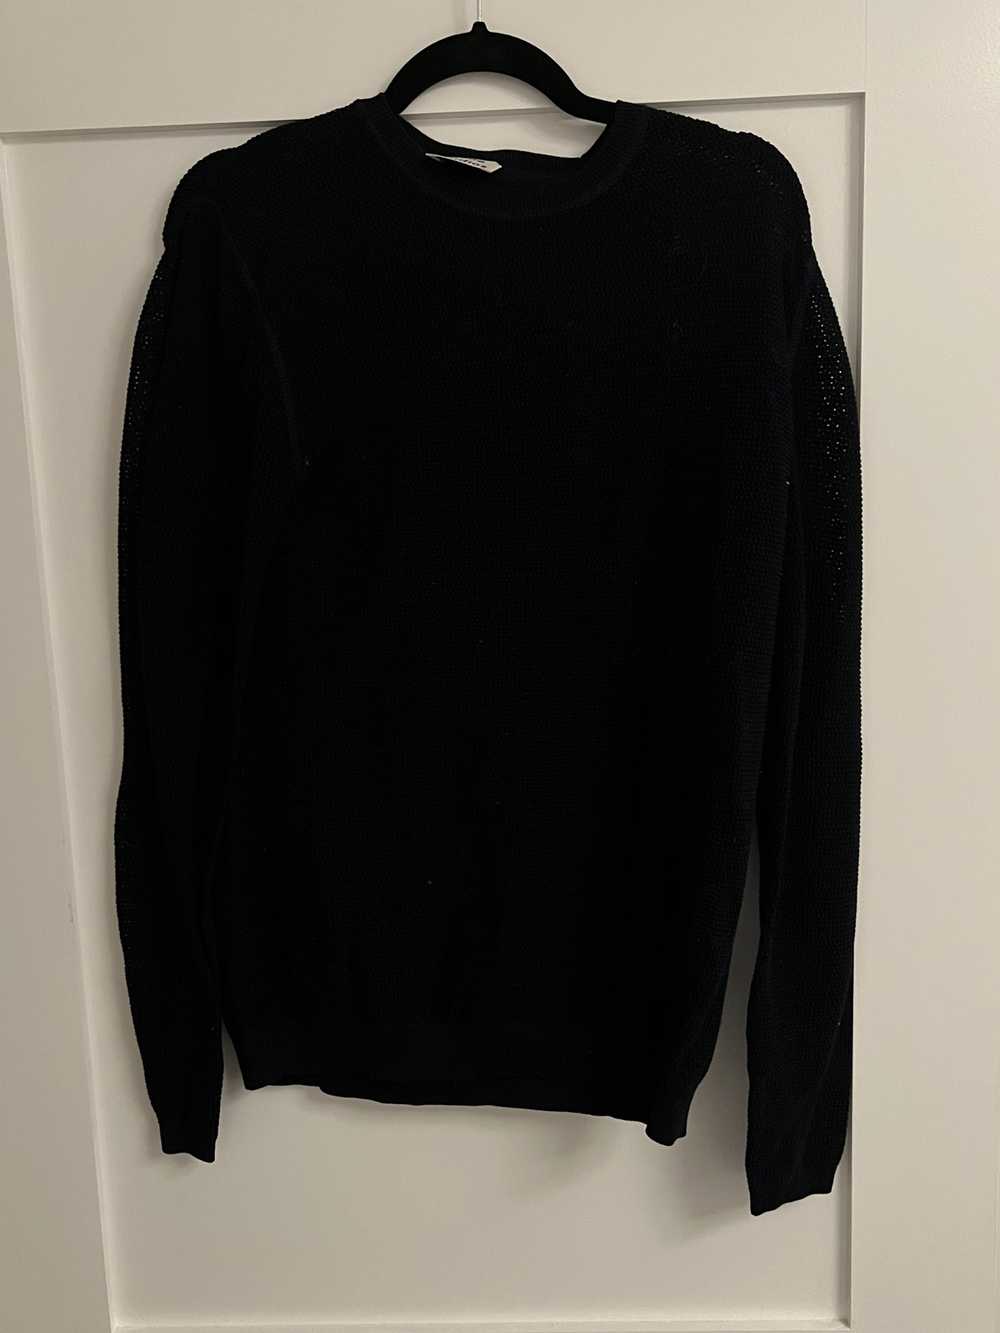 Acne Studios Navy Knit Pullover - image 2